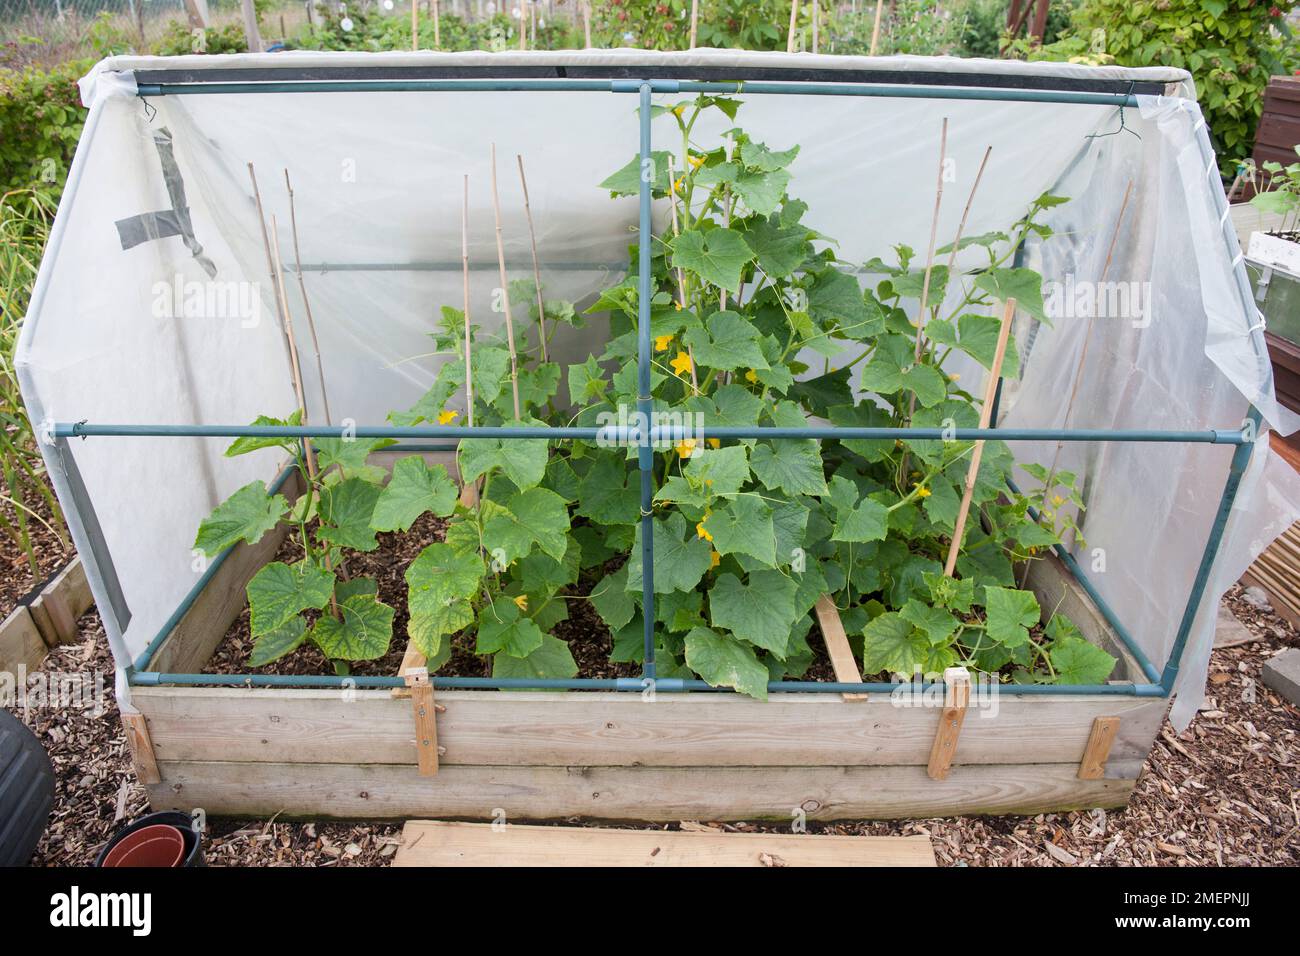 Courgette plants growing in raised bed with protective plastic sheeting Stock Photo